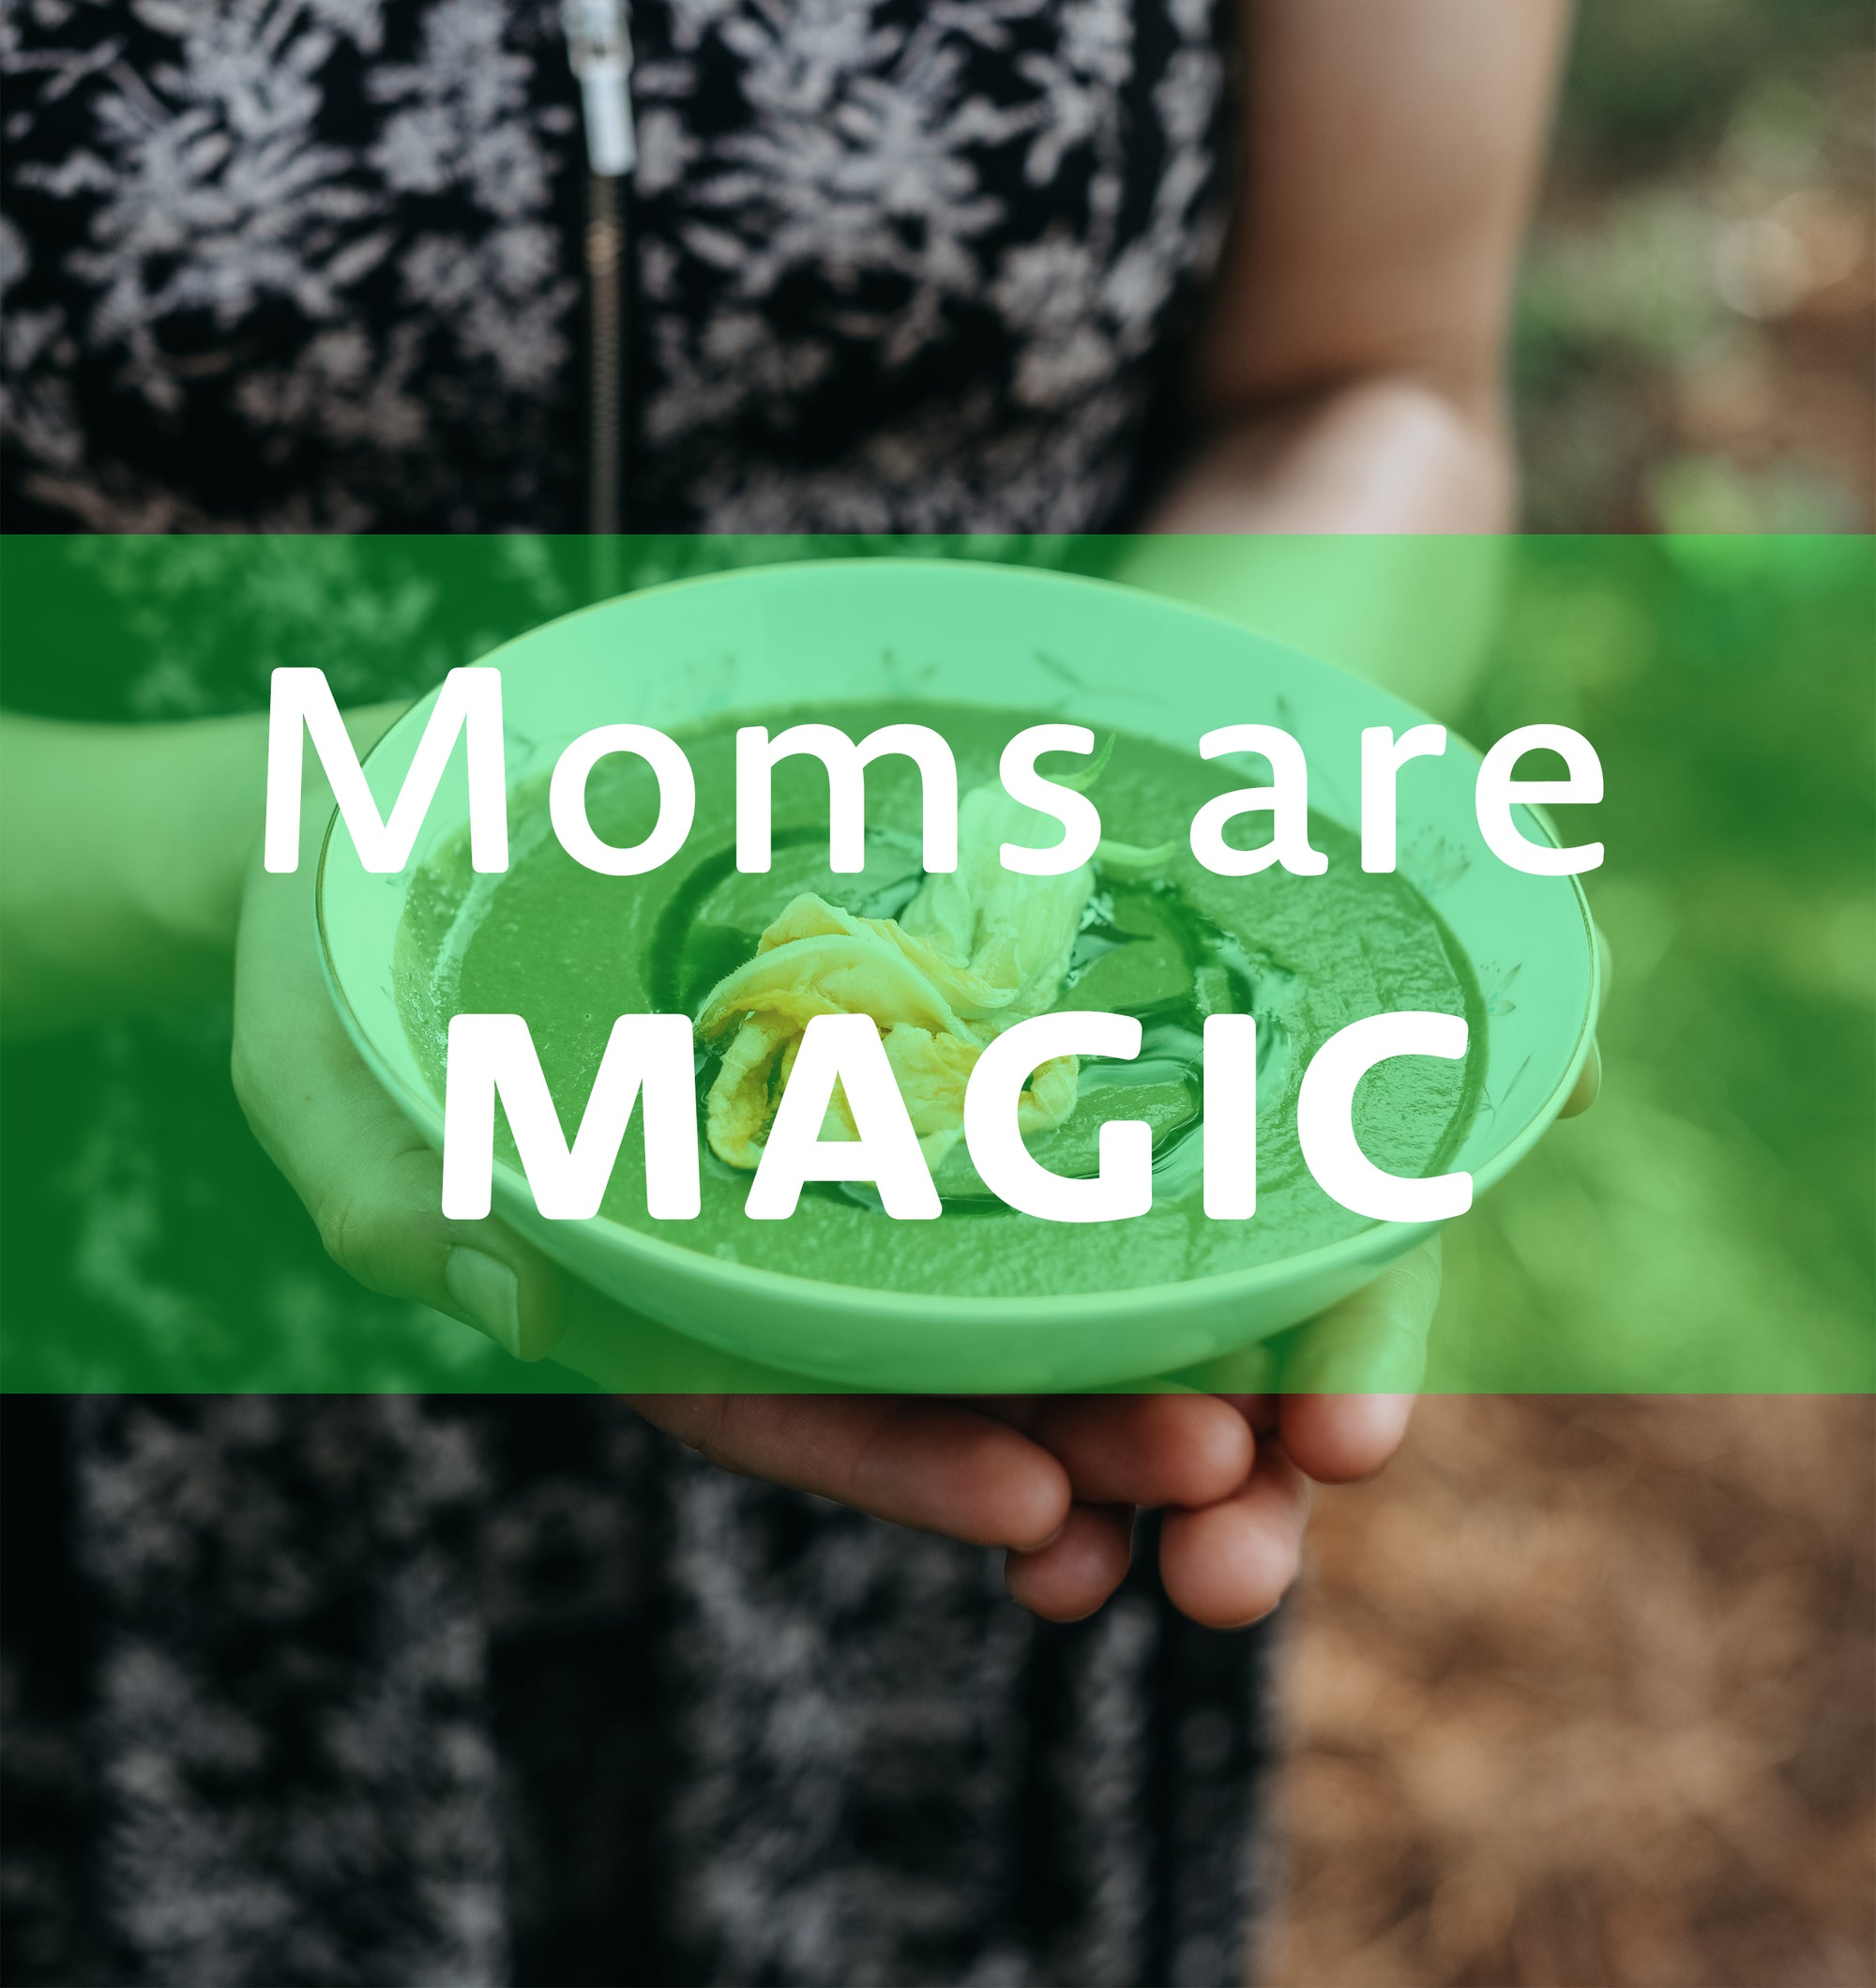 Moms are Magic. Here are some special gifts to celebrate them this Mother's Day!